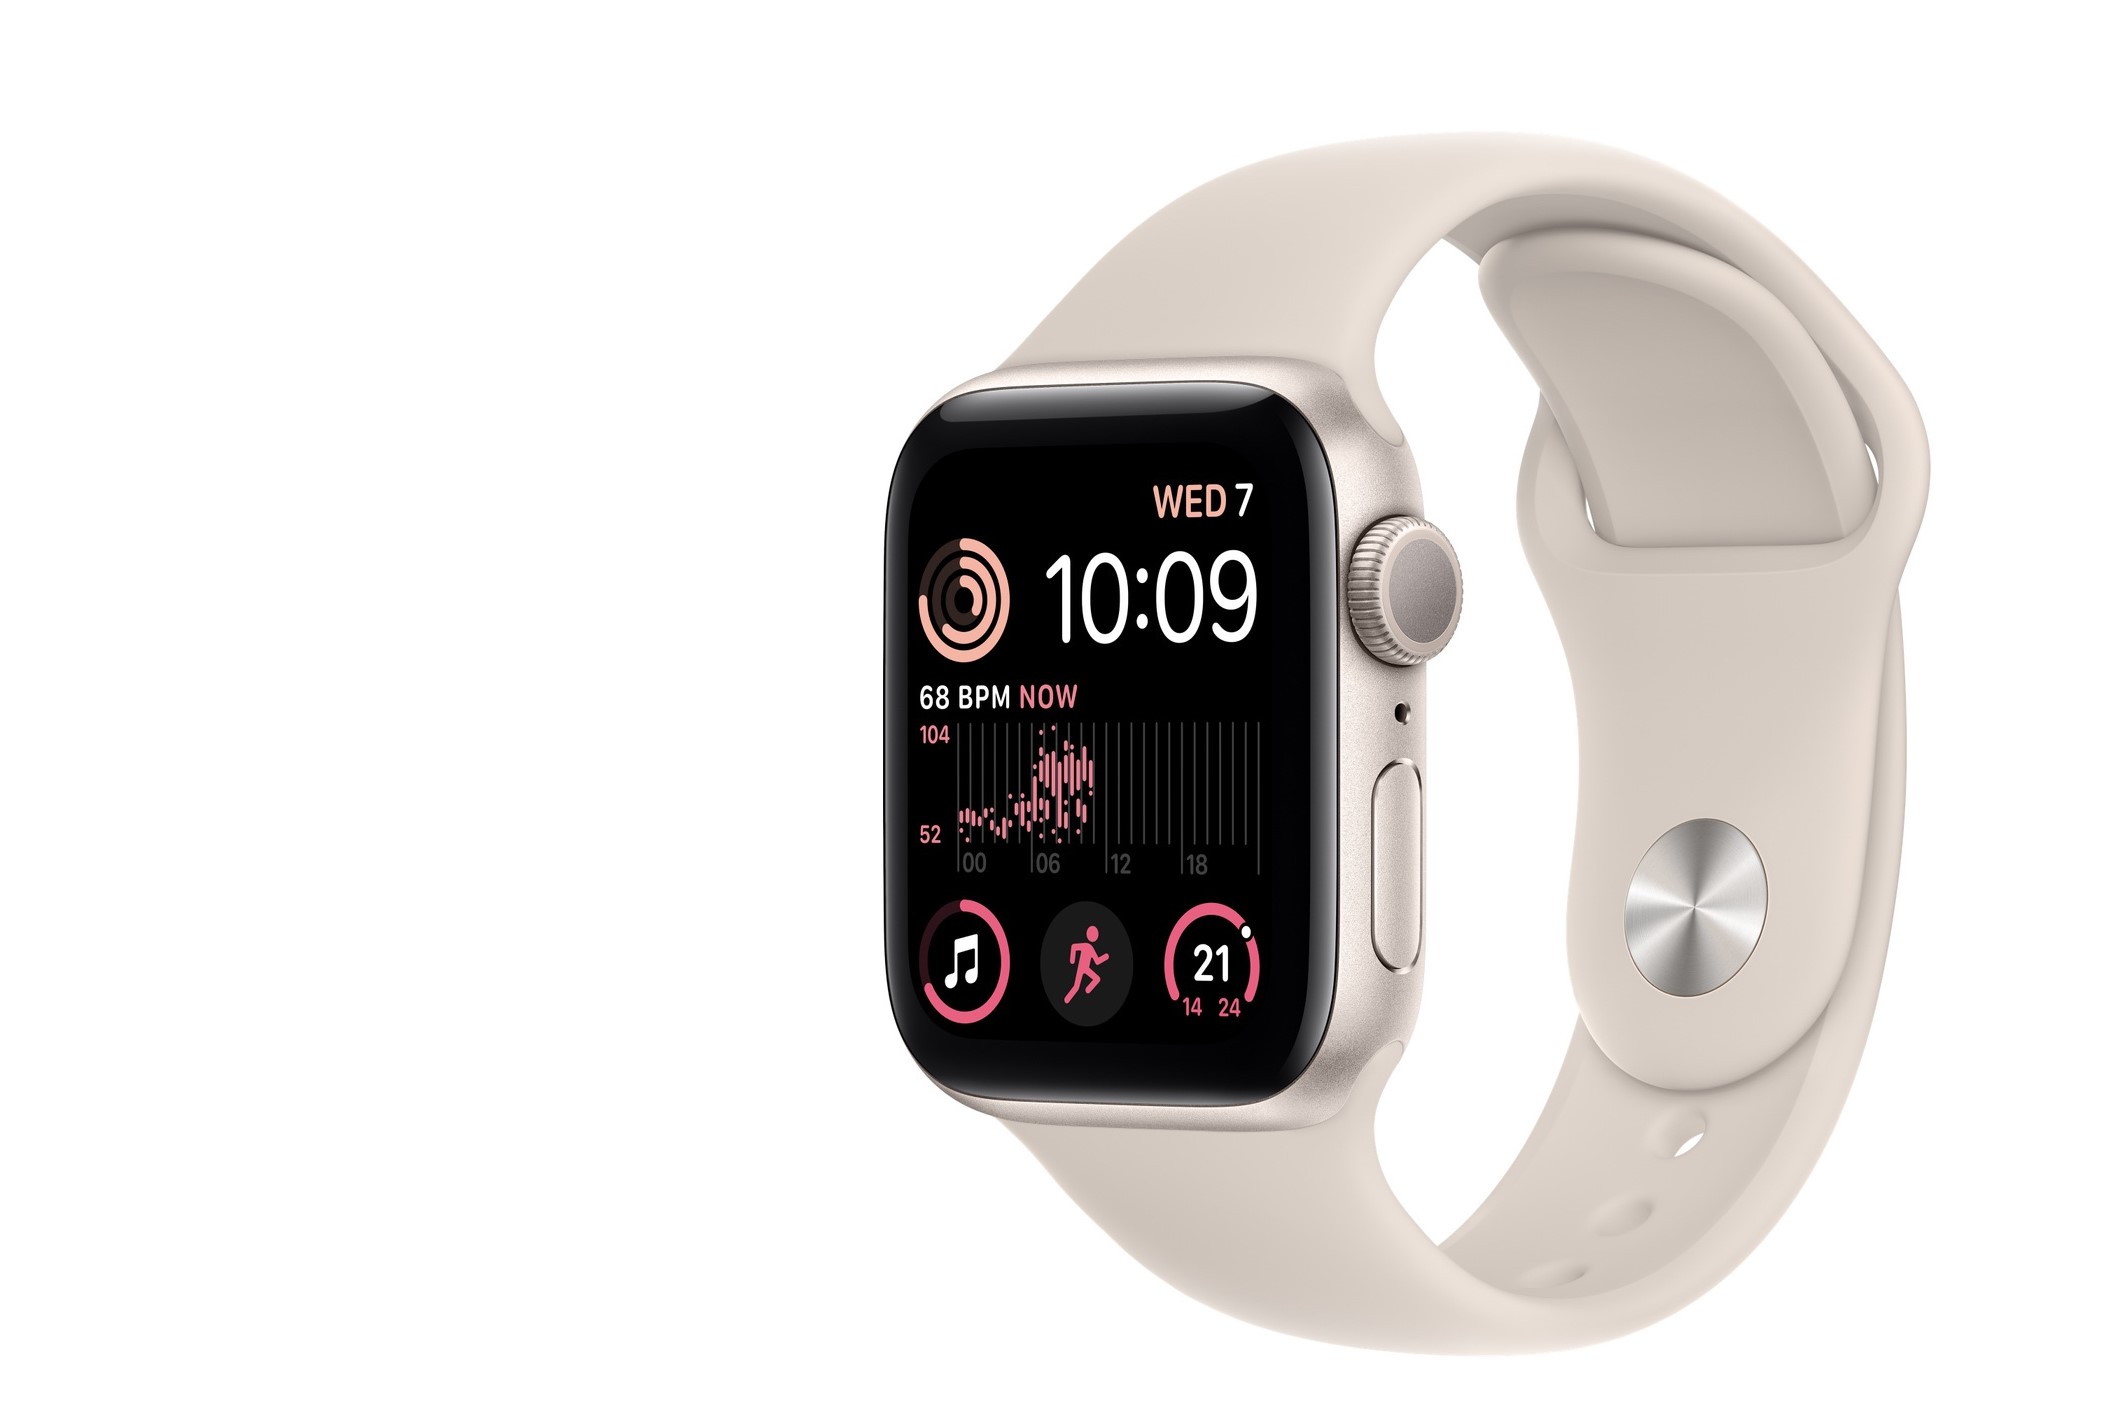 Apple Watch displaying the fitness tracking screen